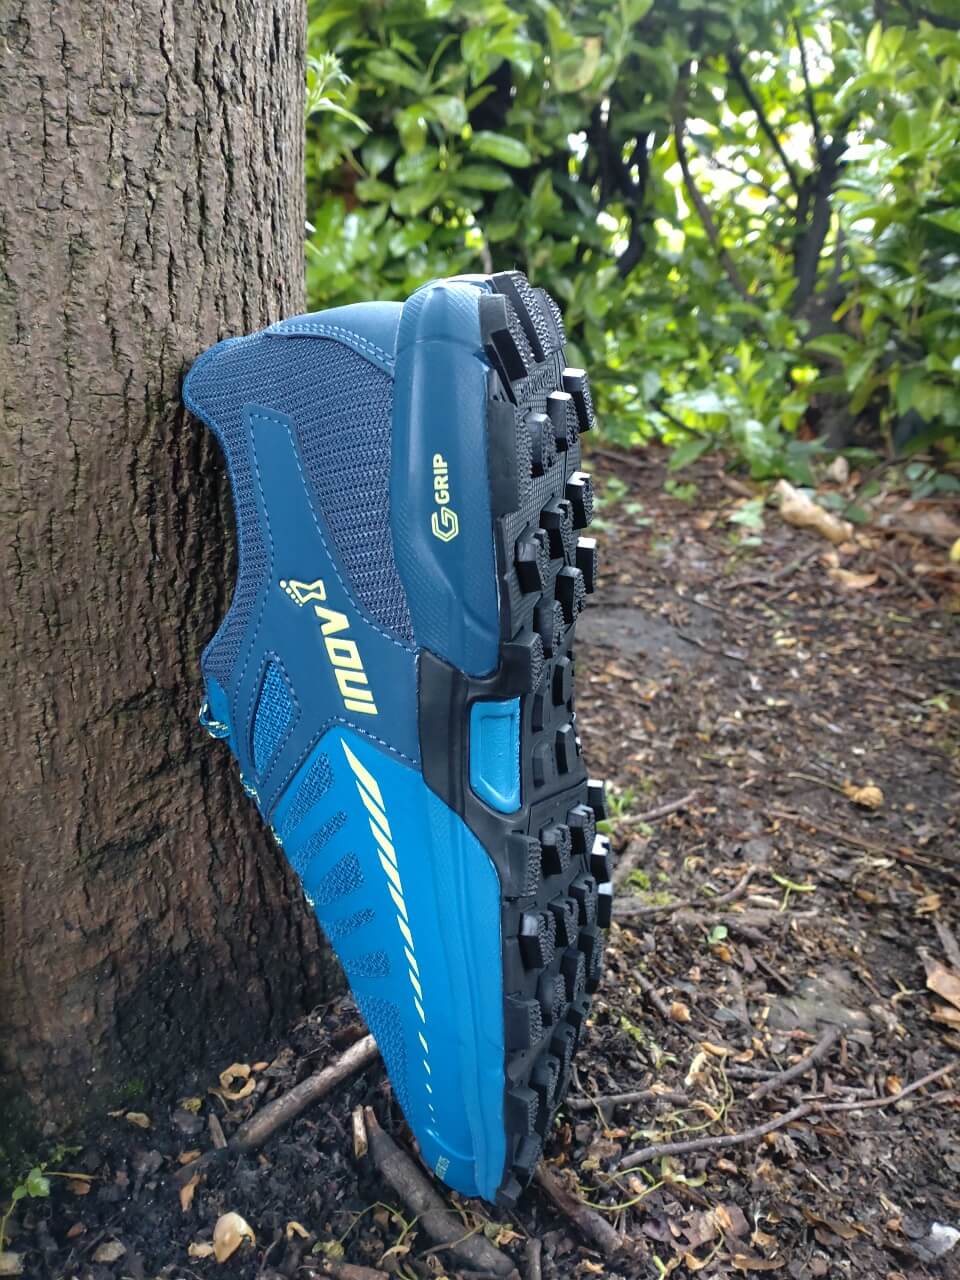 inov-8 Roclite G 275 V2 trail running shoe propped against a tree trunk